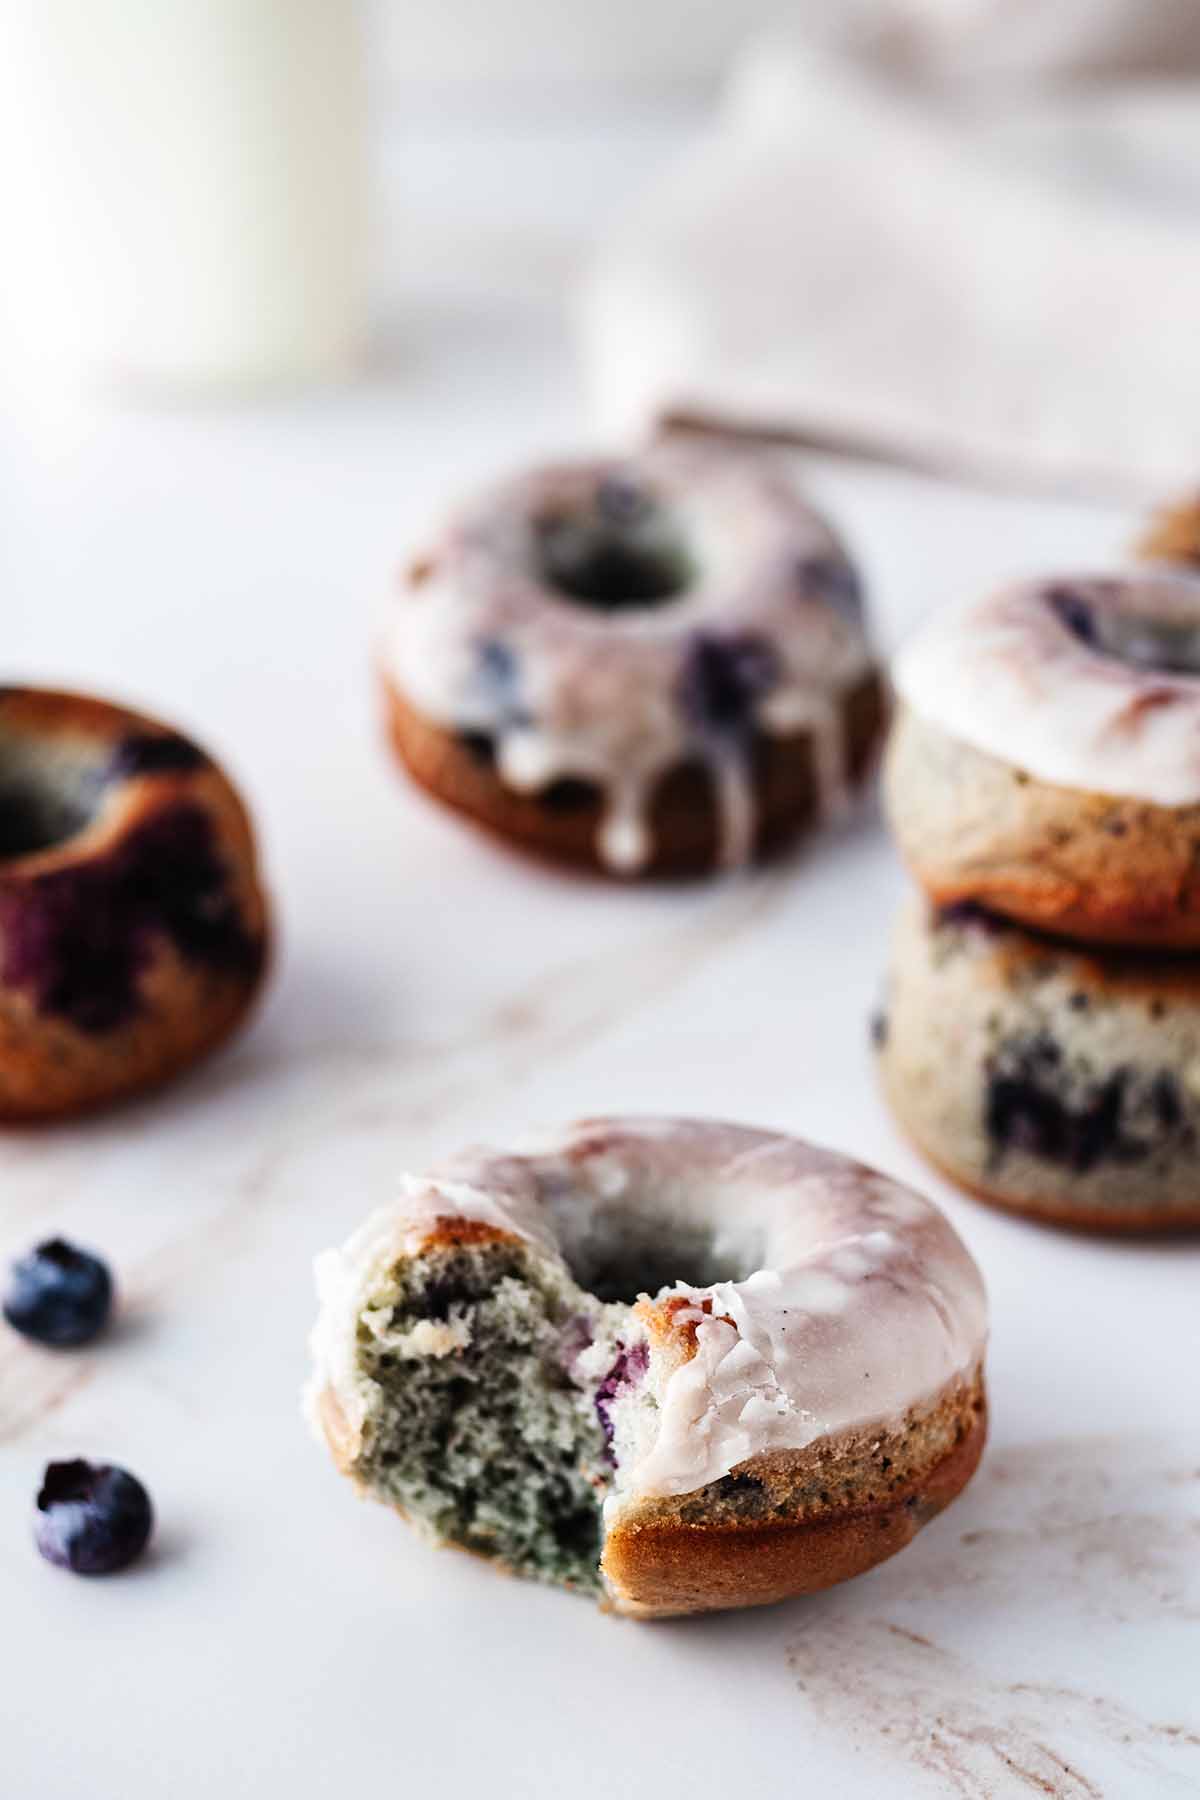 Blueberry donuts and blueberries on a marble surface. One donut has a bite taken out.